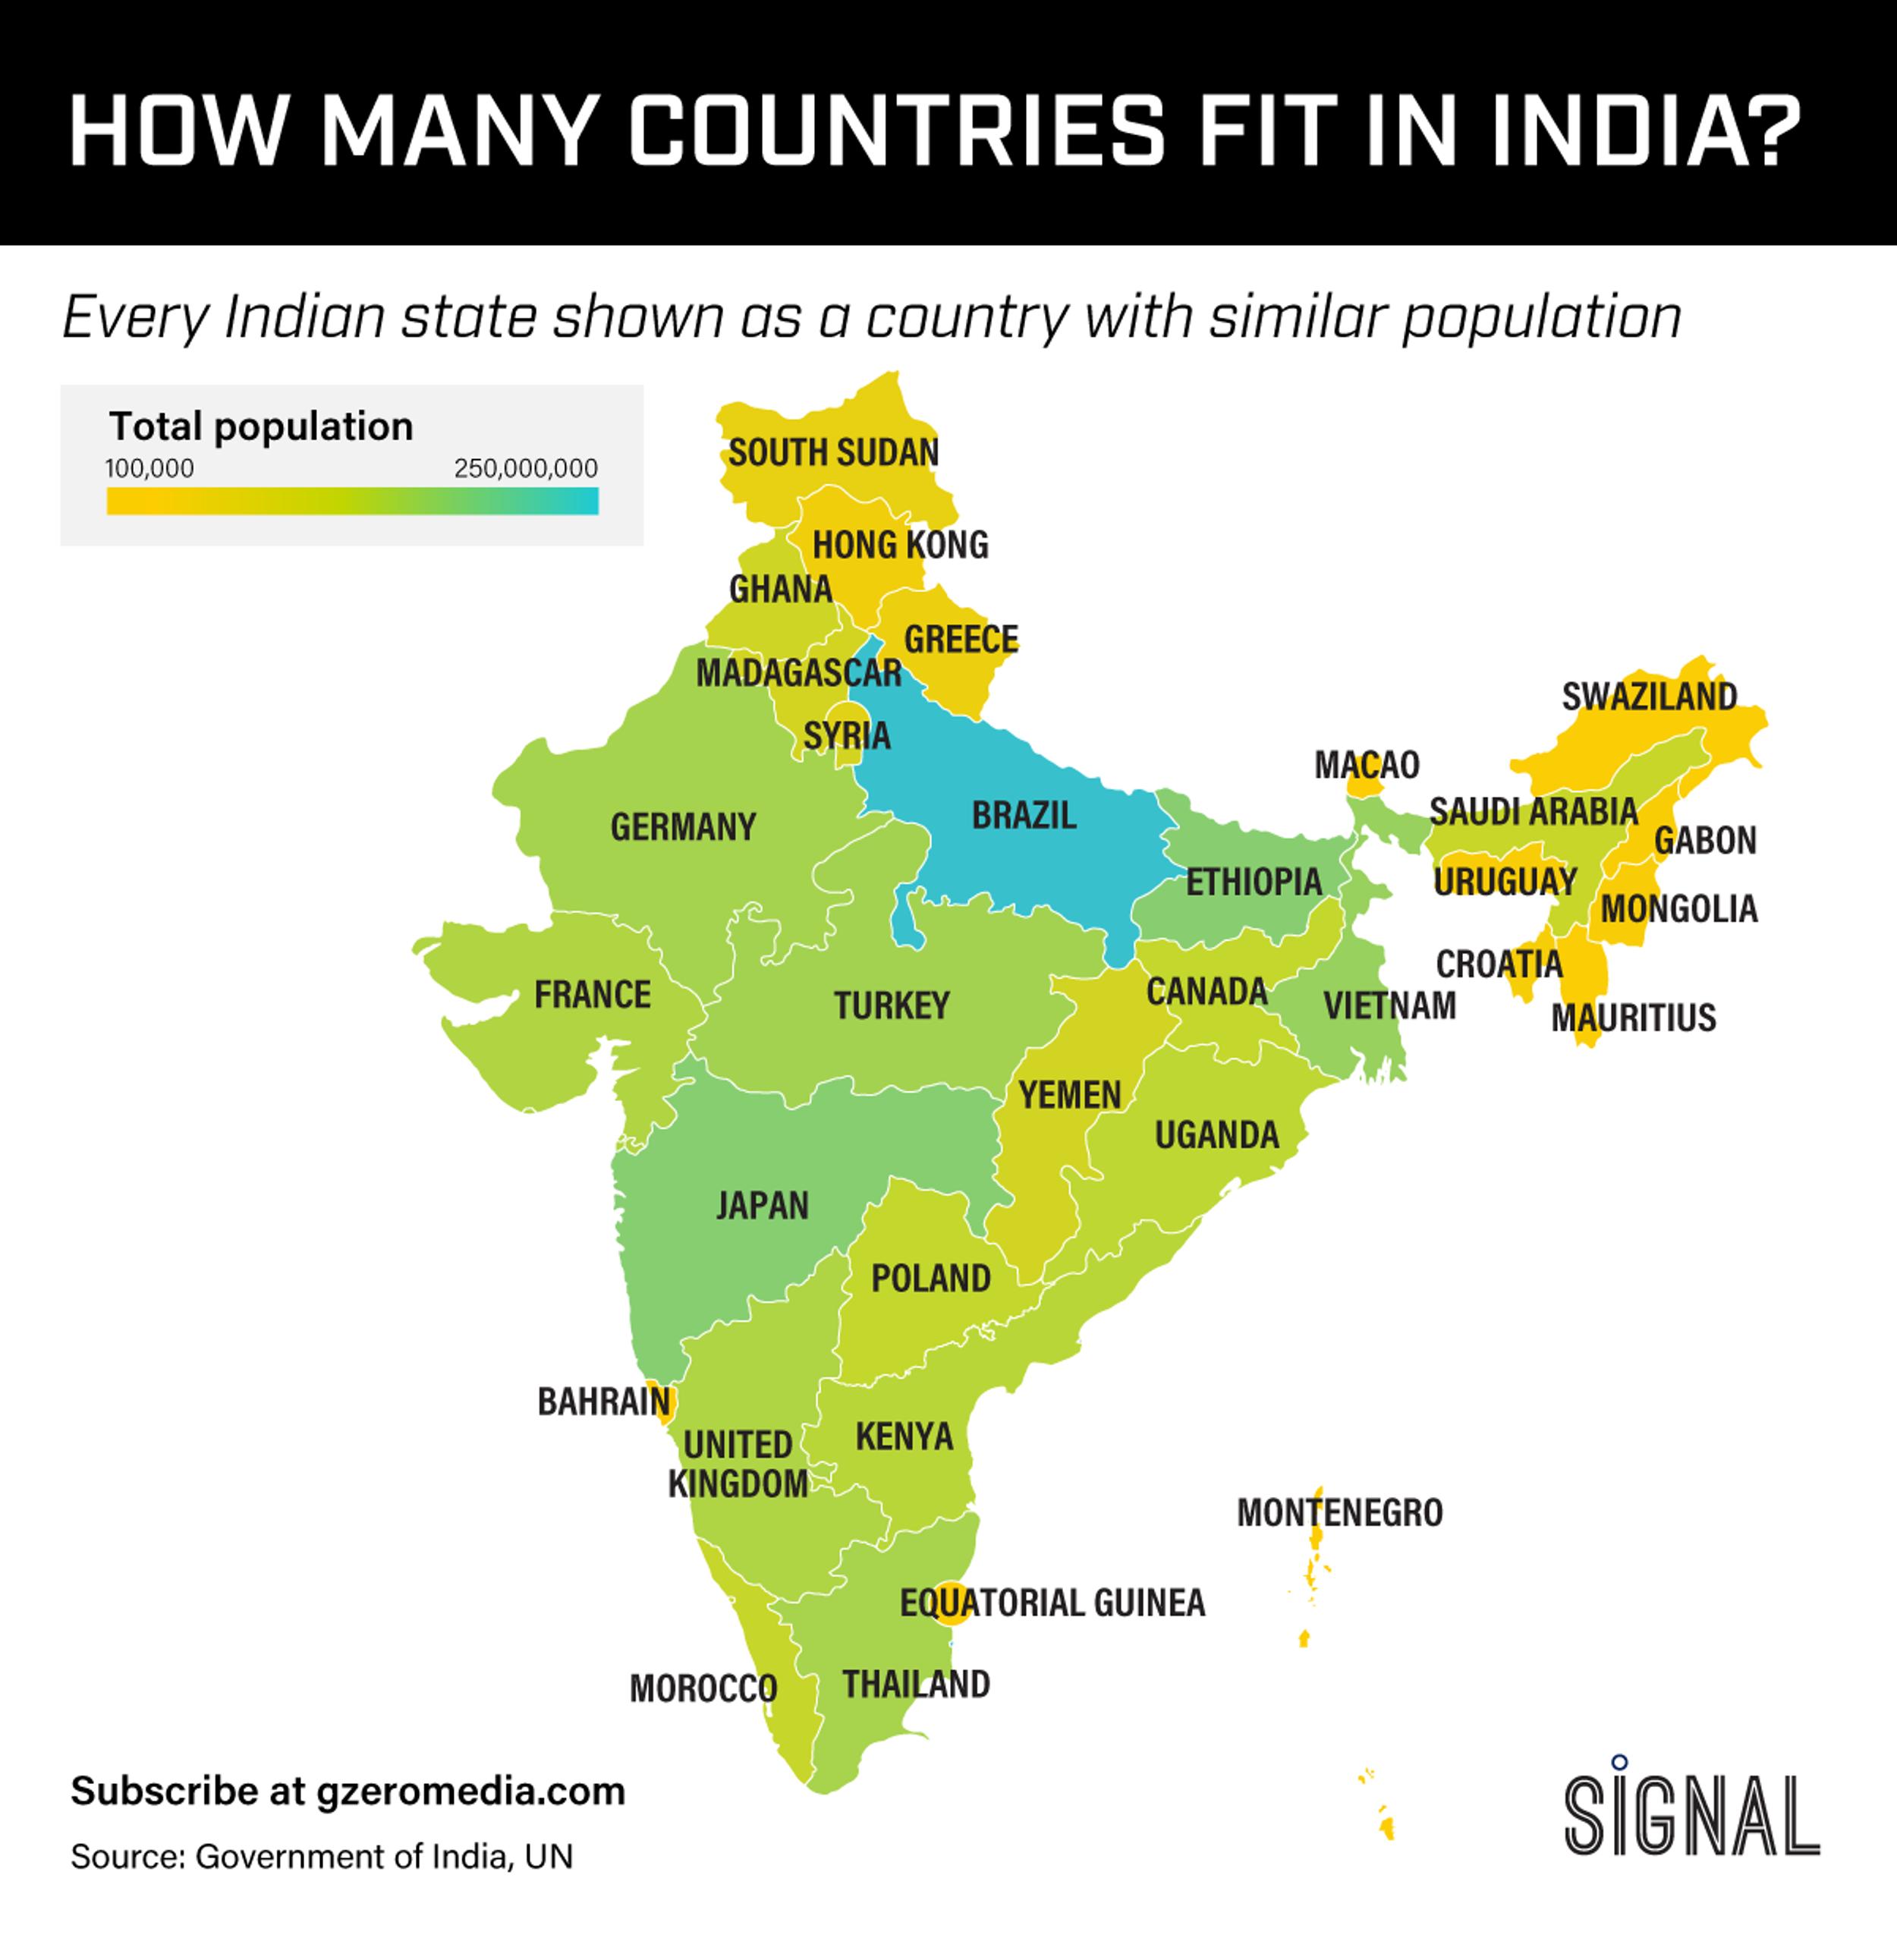 Graphic Truth: How Many Countries Fit in India?